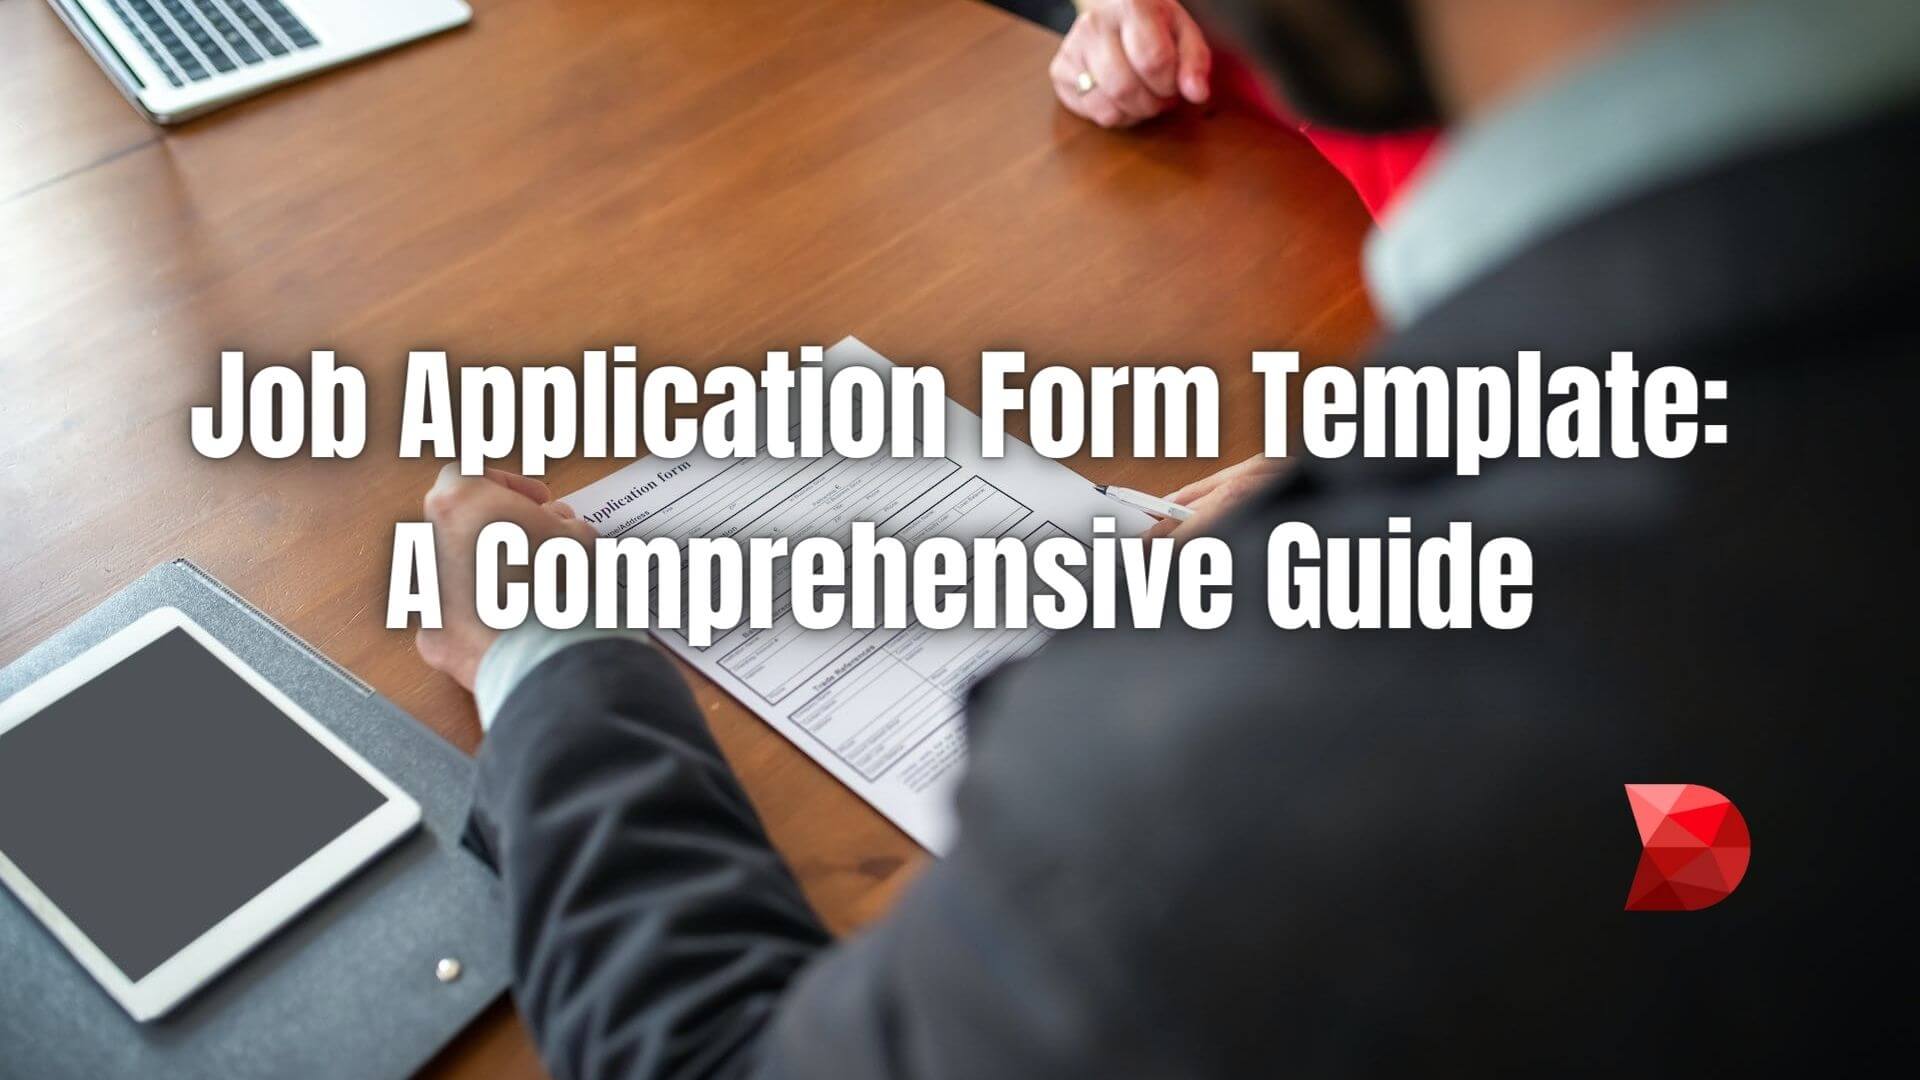 Unlock the secrets to effective job application form templates with our guide. Optimize your hiring process for success. Learn more!